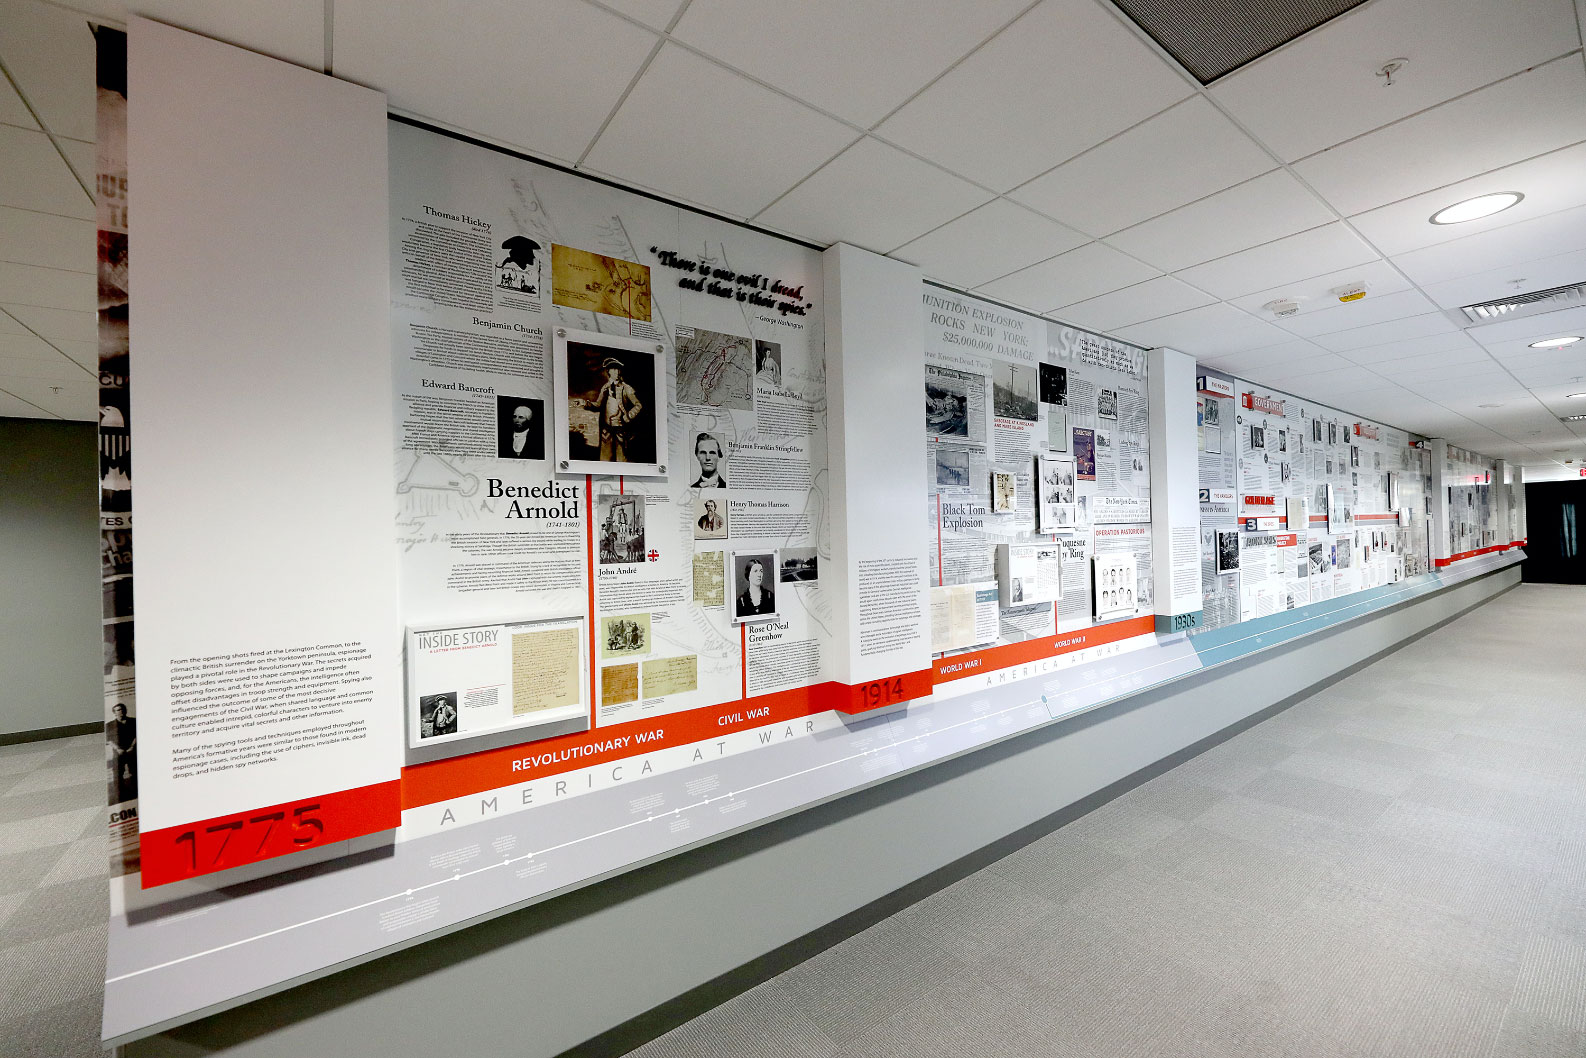 The Wall of Spies special exhibit housed at the Intelligence Community Campus Bethesda